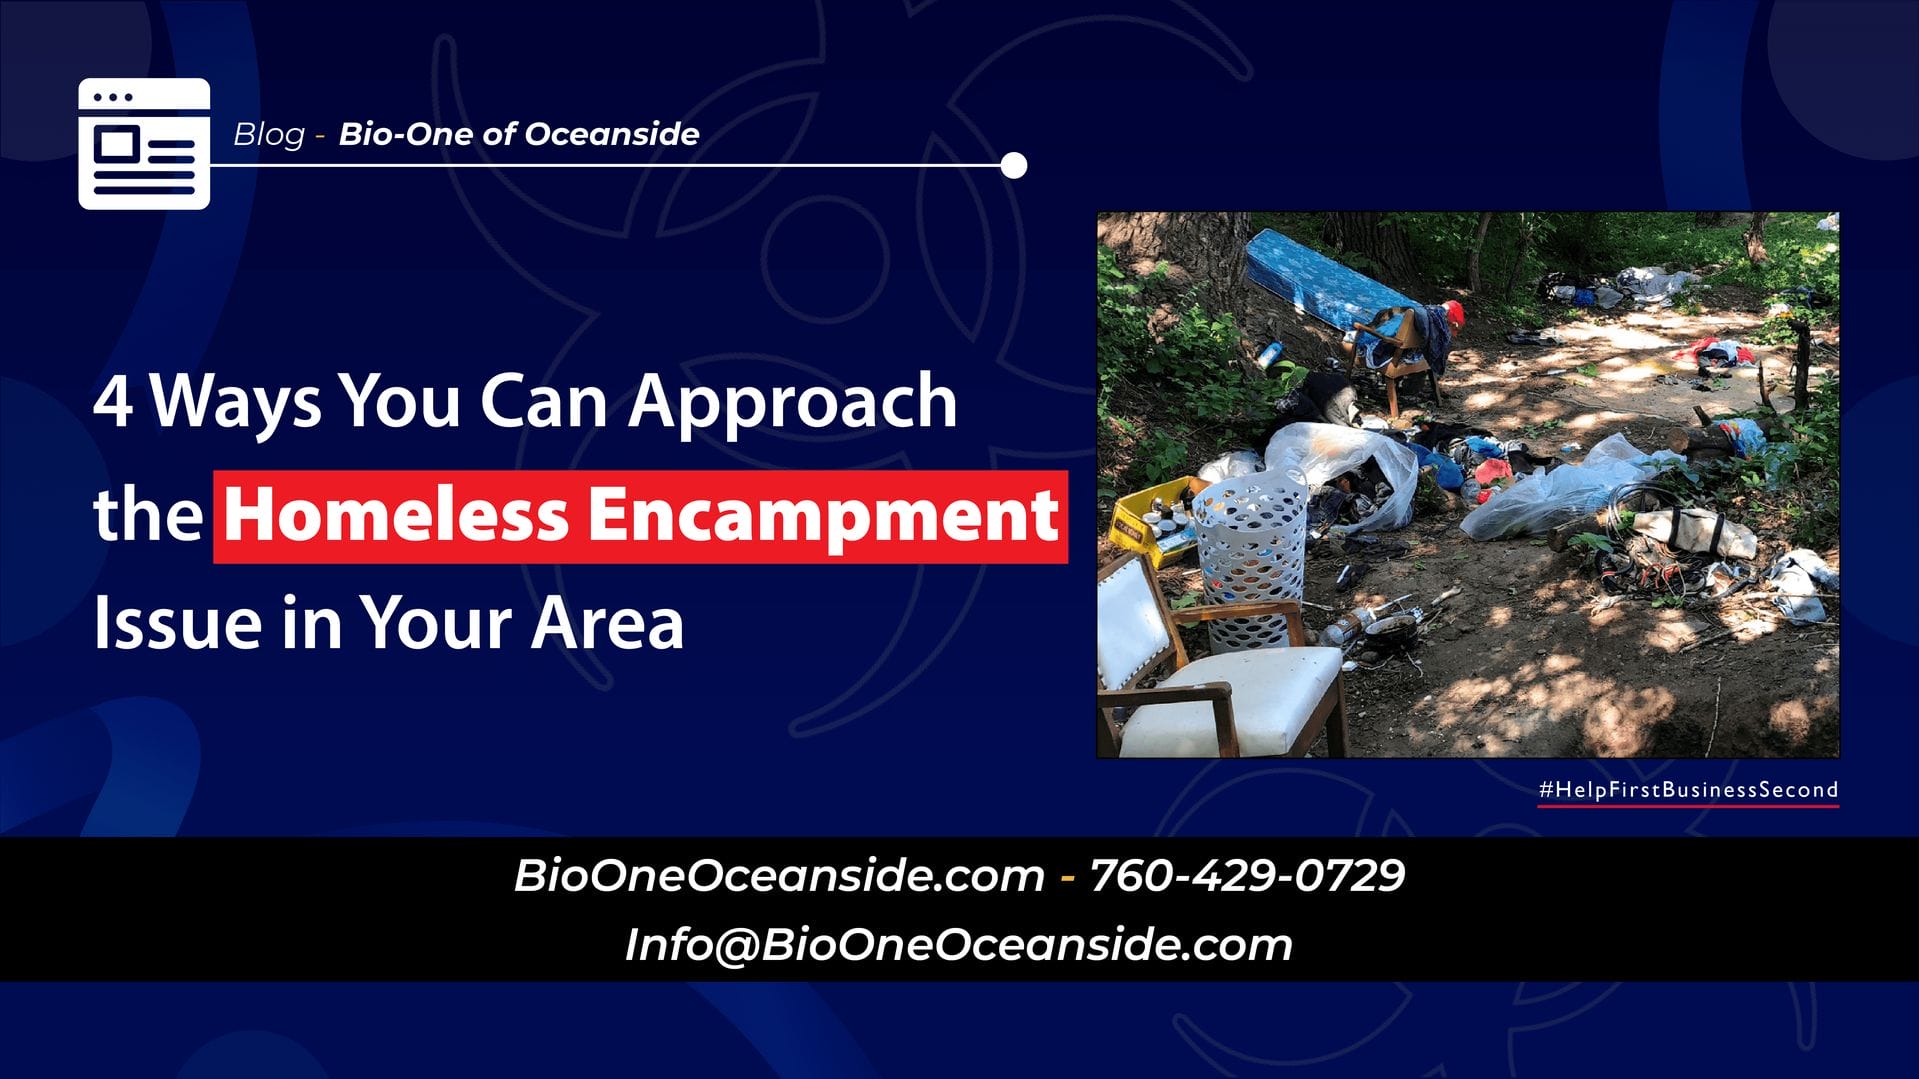 4 ways you can approach the homeless encampment issue in your area